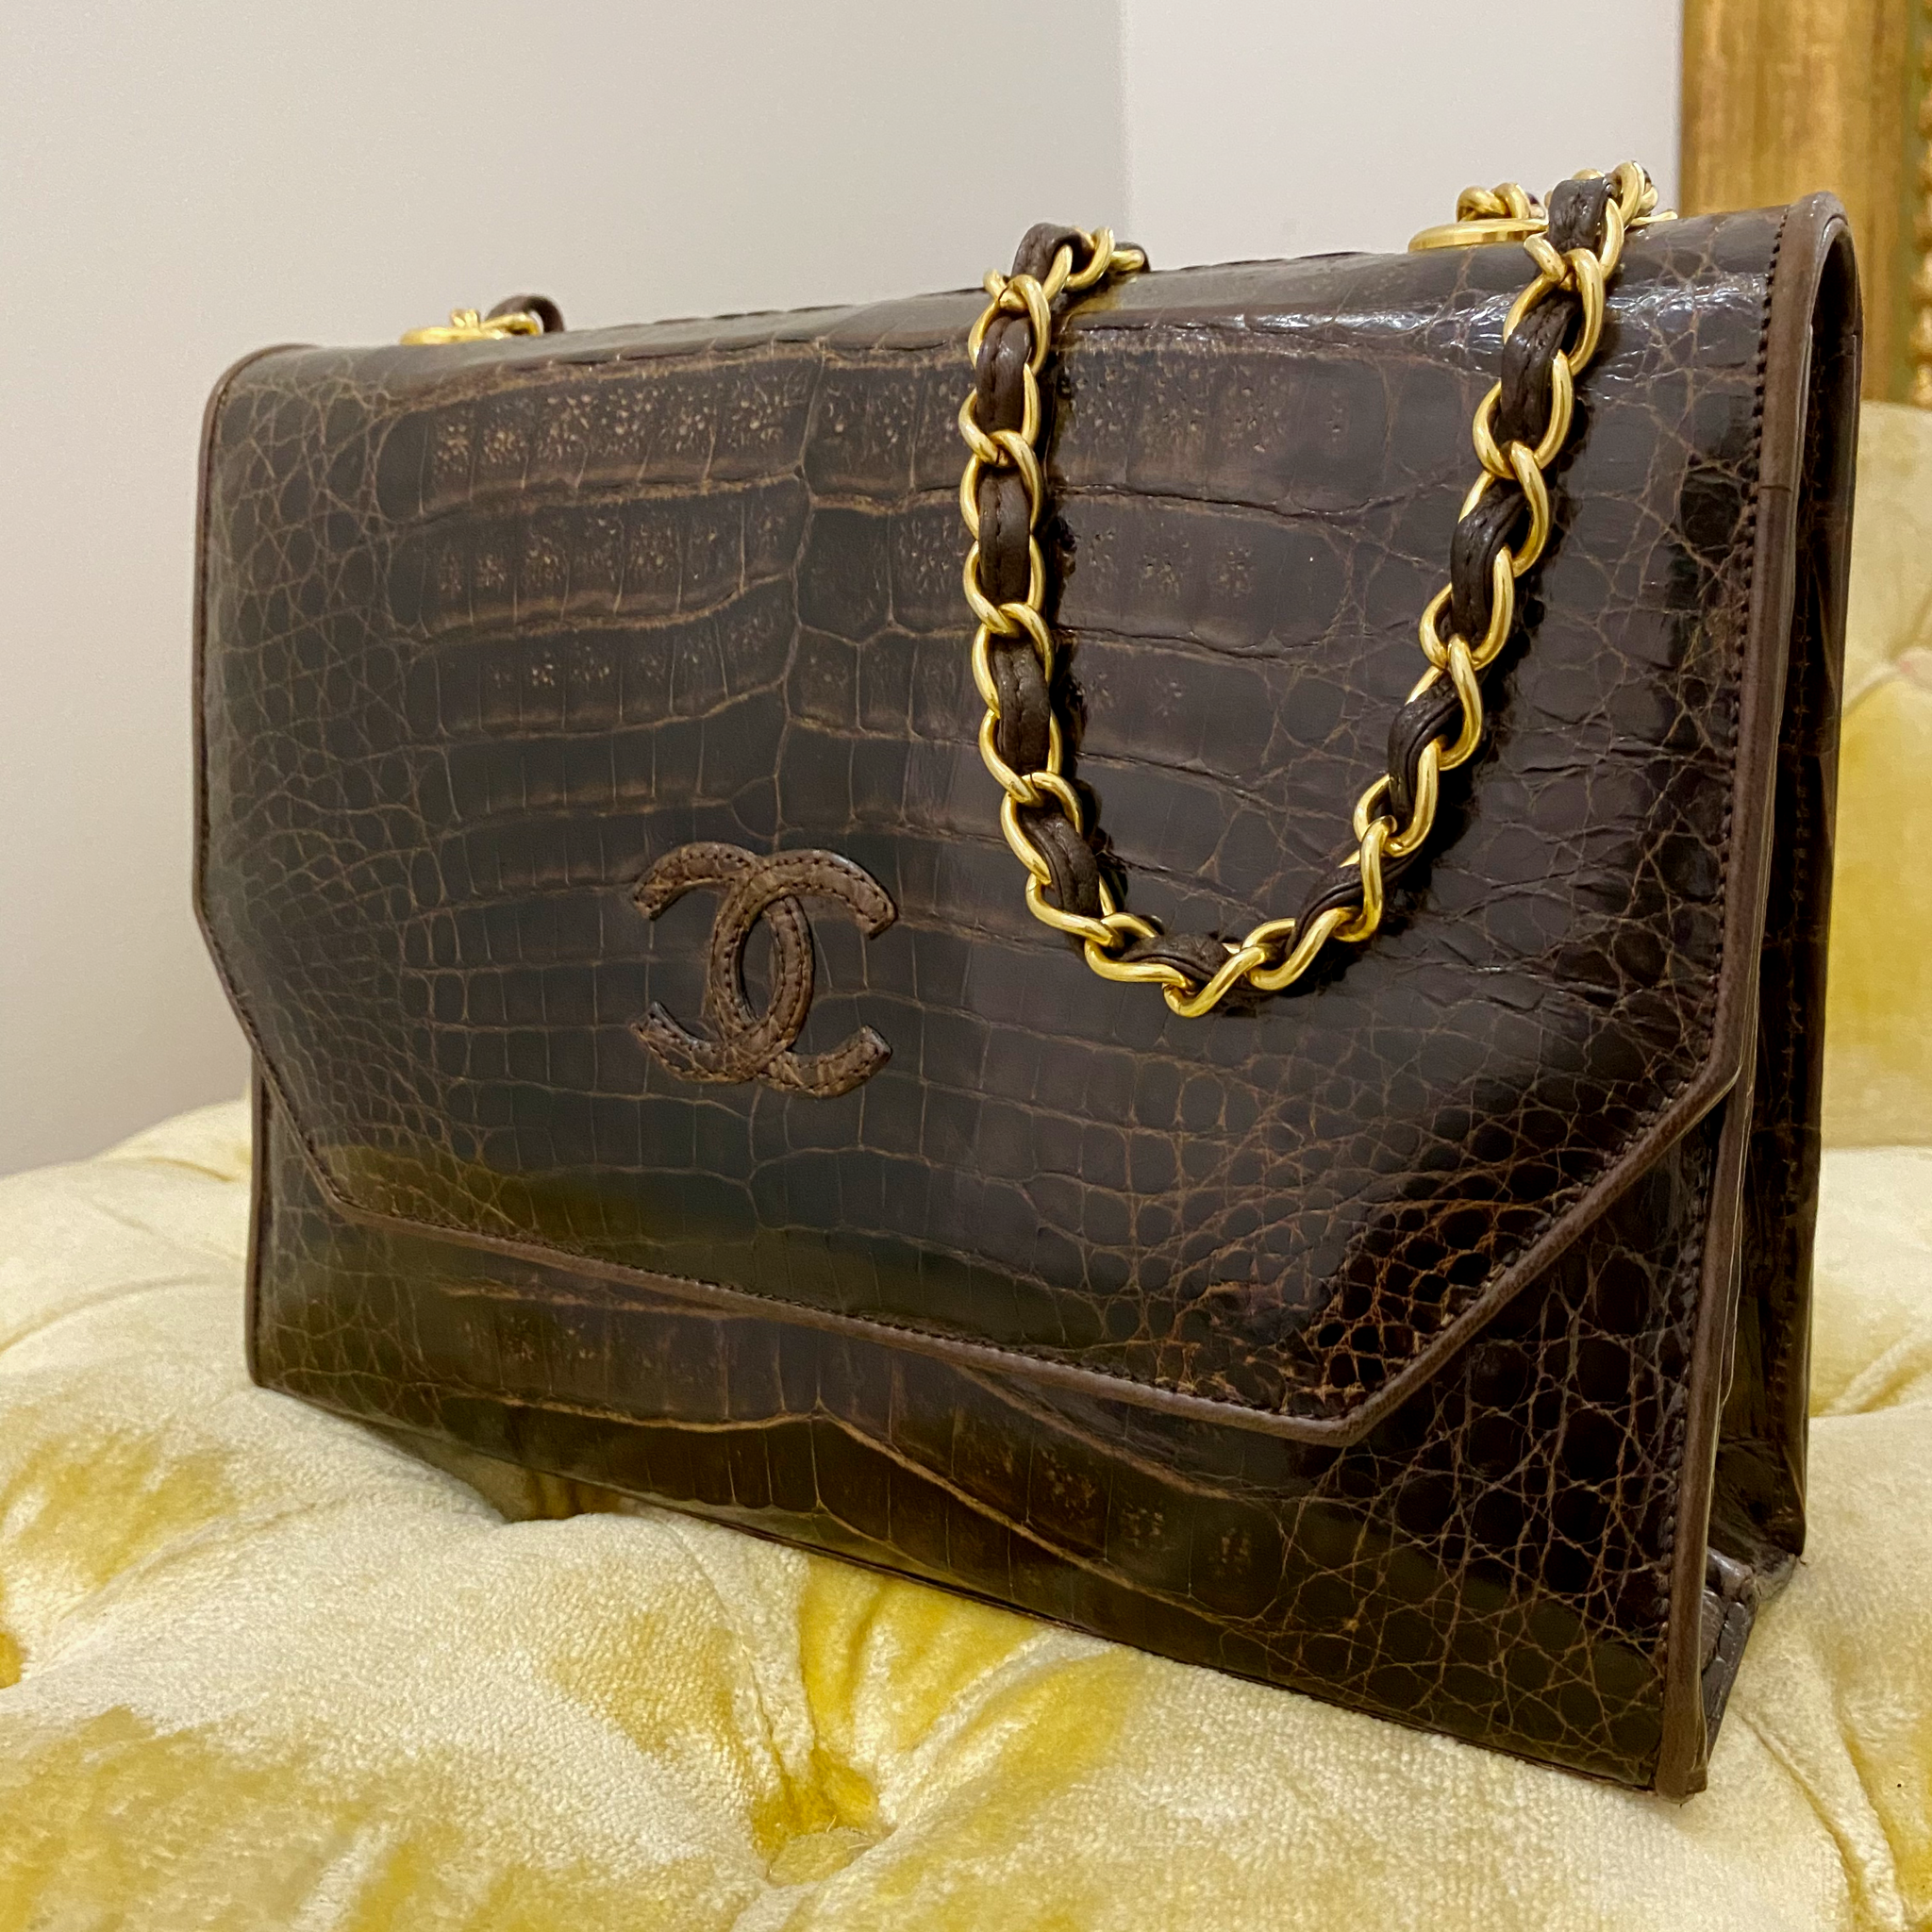 unboxing this GORGEOUS rare vintage brown CHANEL bag!! #vintage